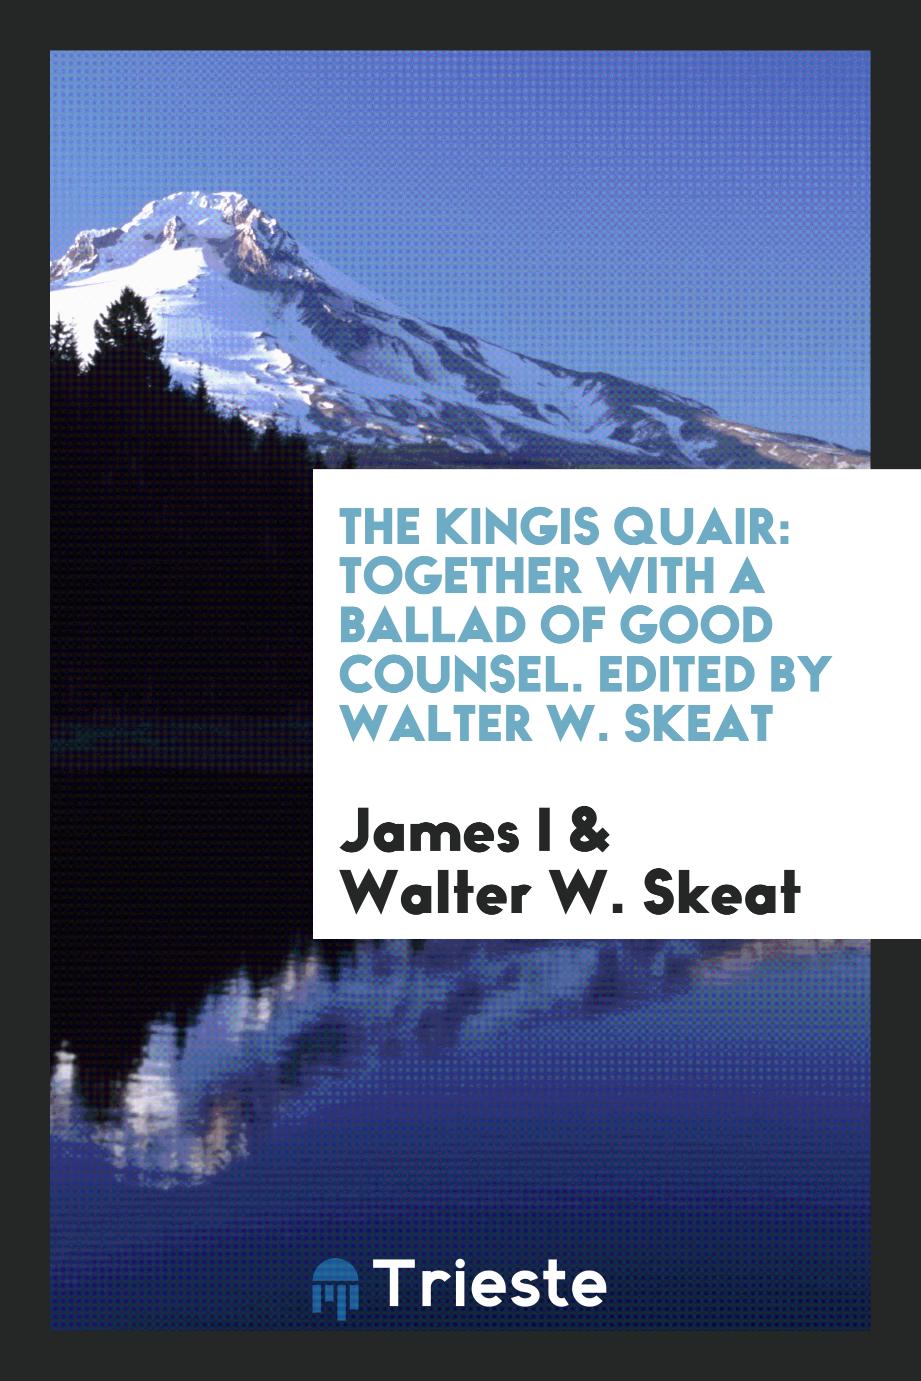 The Kingis Quair: Together with a Ballad of Good Counsel. Edited by Walter W. Skeat